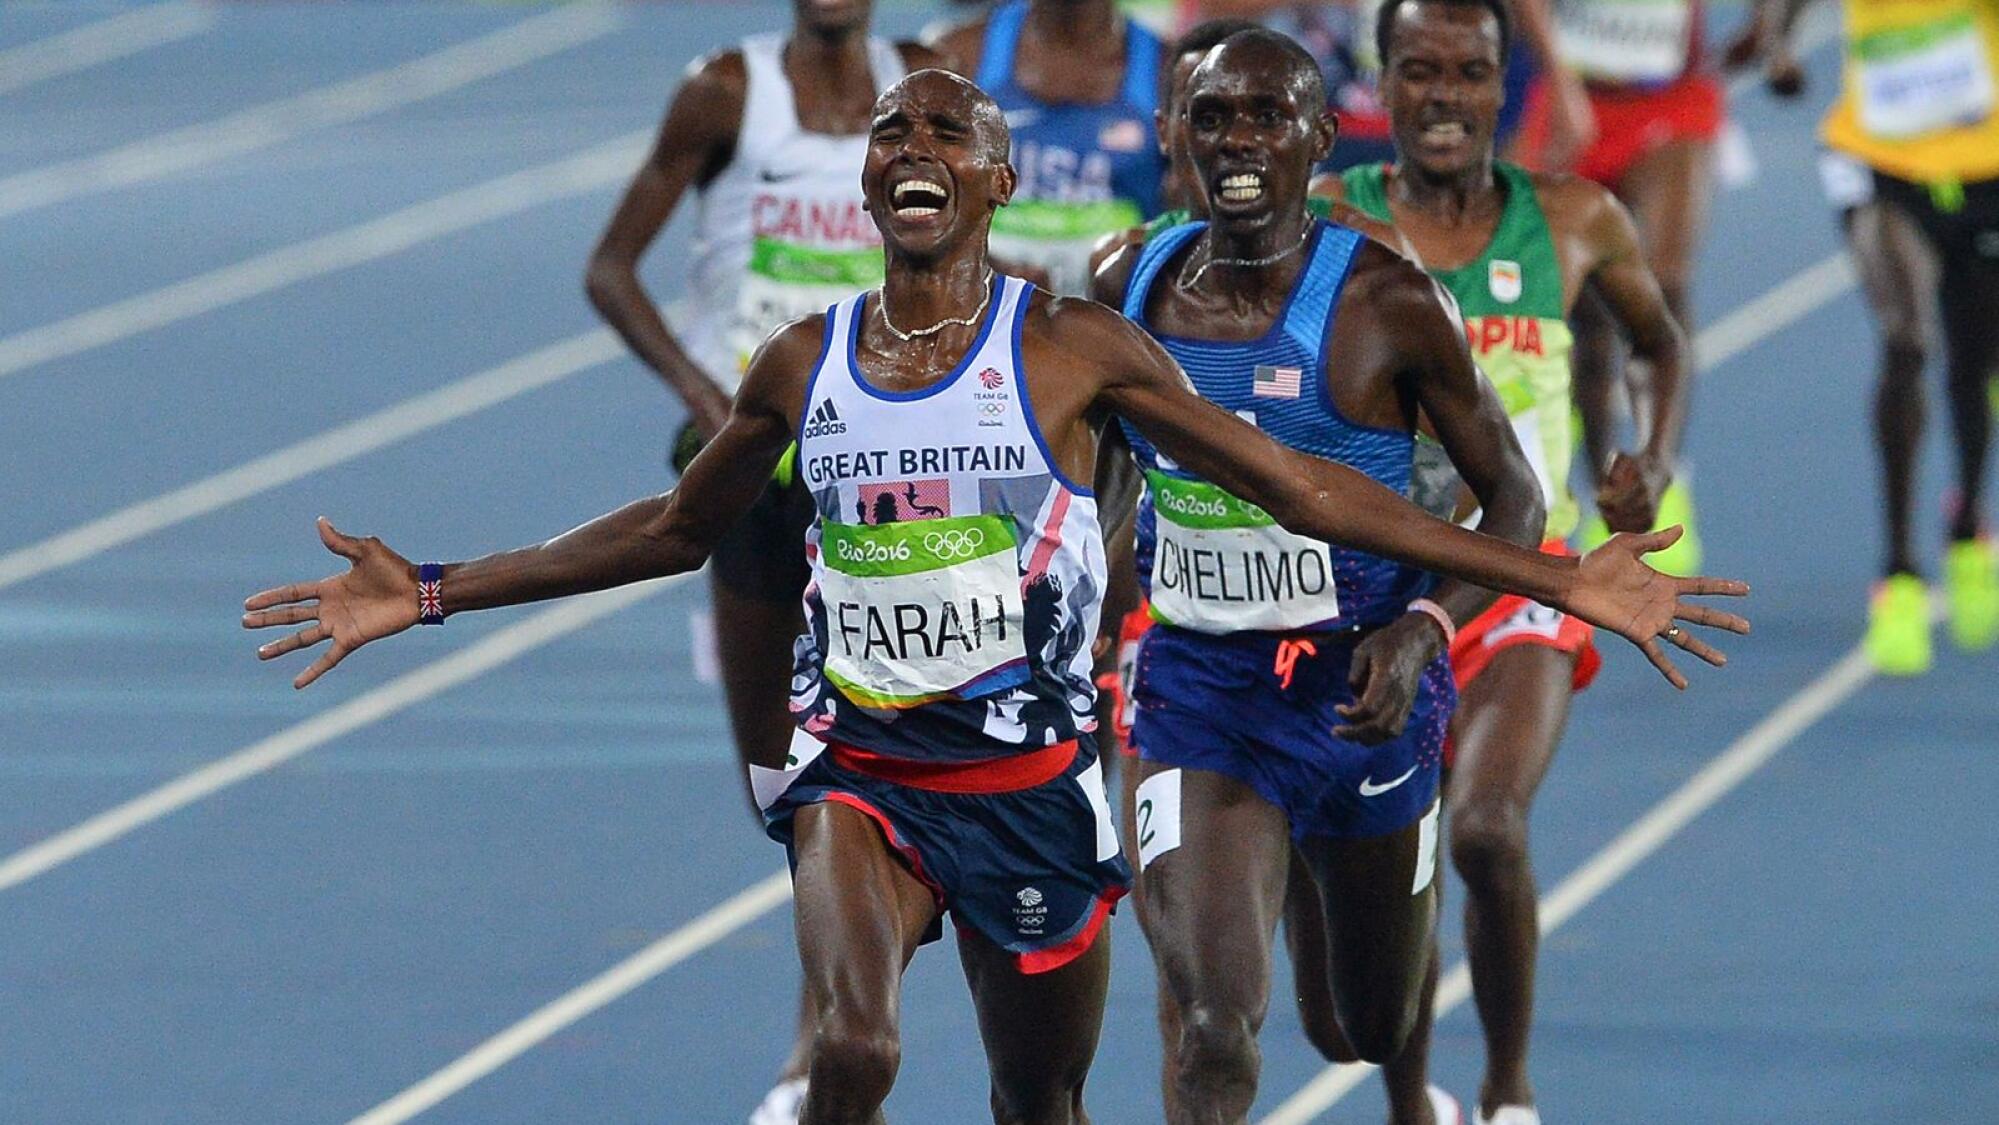 Mo Farah wins gold in the men’s 5000m final during the 2016 Rio Olympic Games Athletics Events in Rio de Janeiro, Brazil 